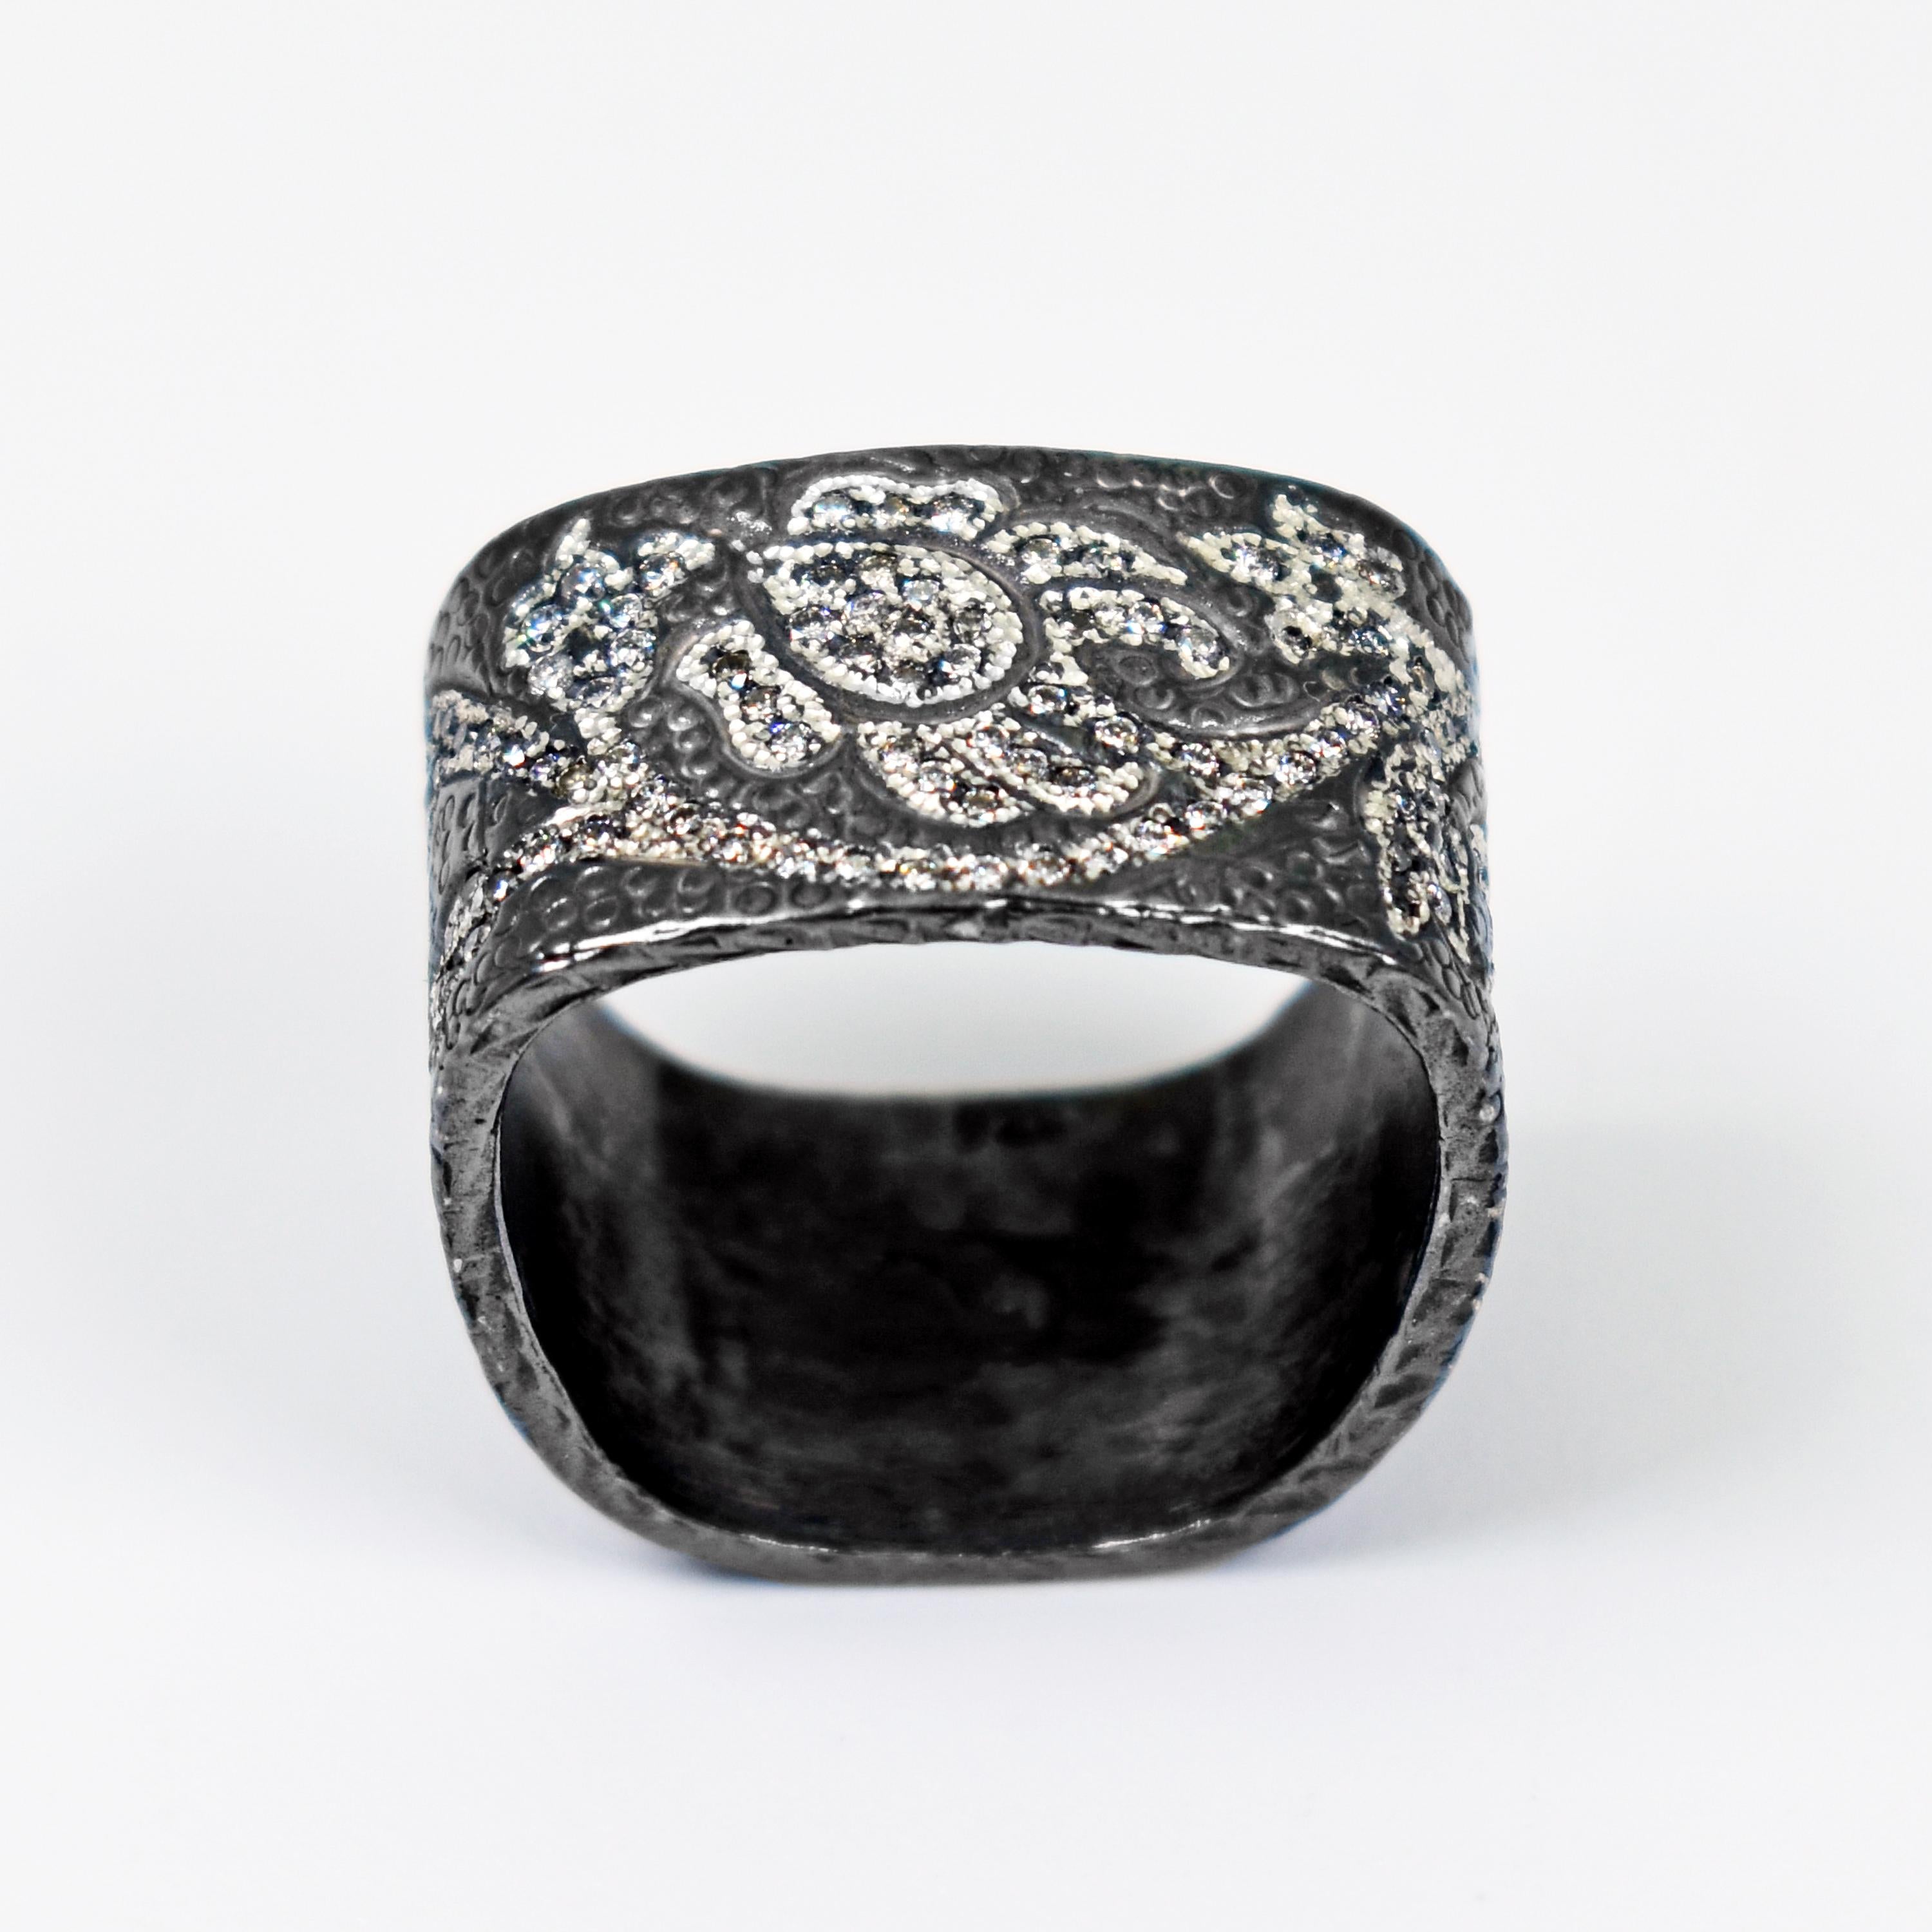 Diamond pavé (0.75 carats, G-H, SI1) engraved / tooled oxidized sterling silver square-shaped ring. Ring is size 7. Ring band measures 0.50 inch wide. 